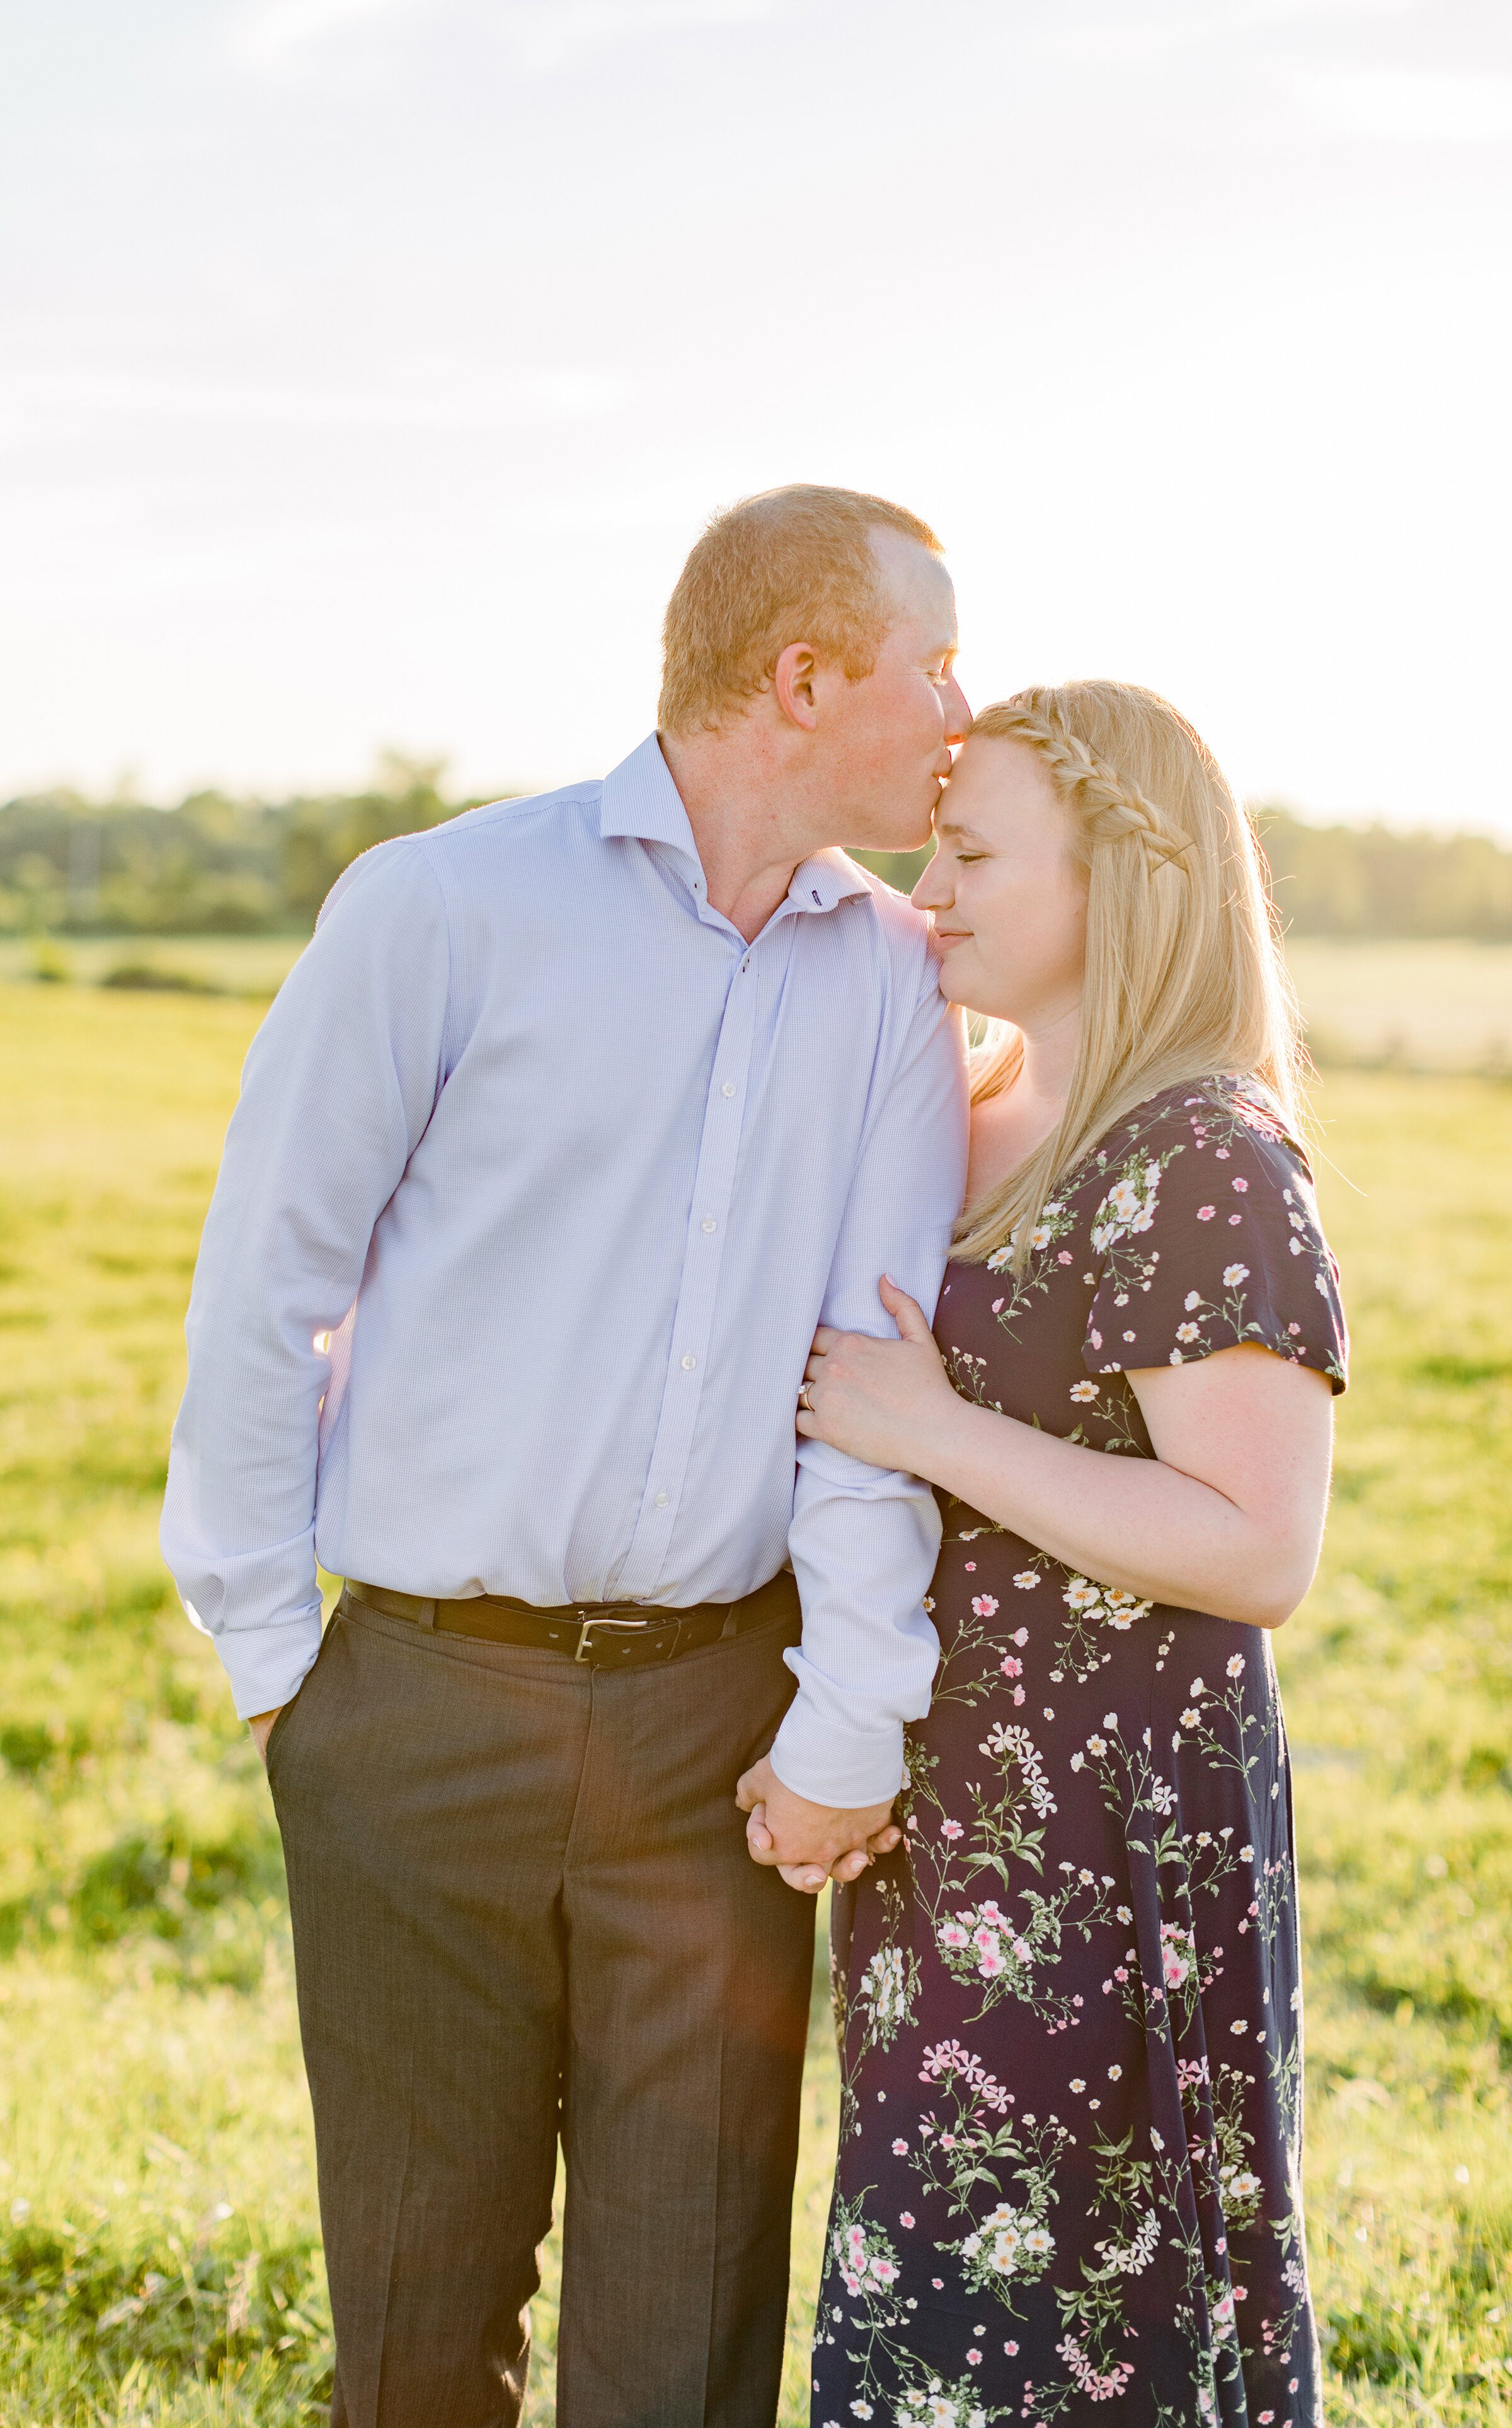  Groom kisses his glowing bride to be on the forehead in a bright and airy country styled engagement session in Perth, Ottawa. Location inspiration for engagement sessions couple goals couple pose inspiration outdoor photo shoot inspiration ideas and